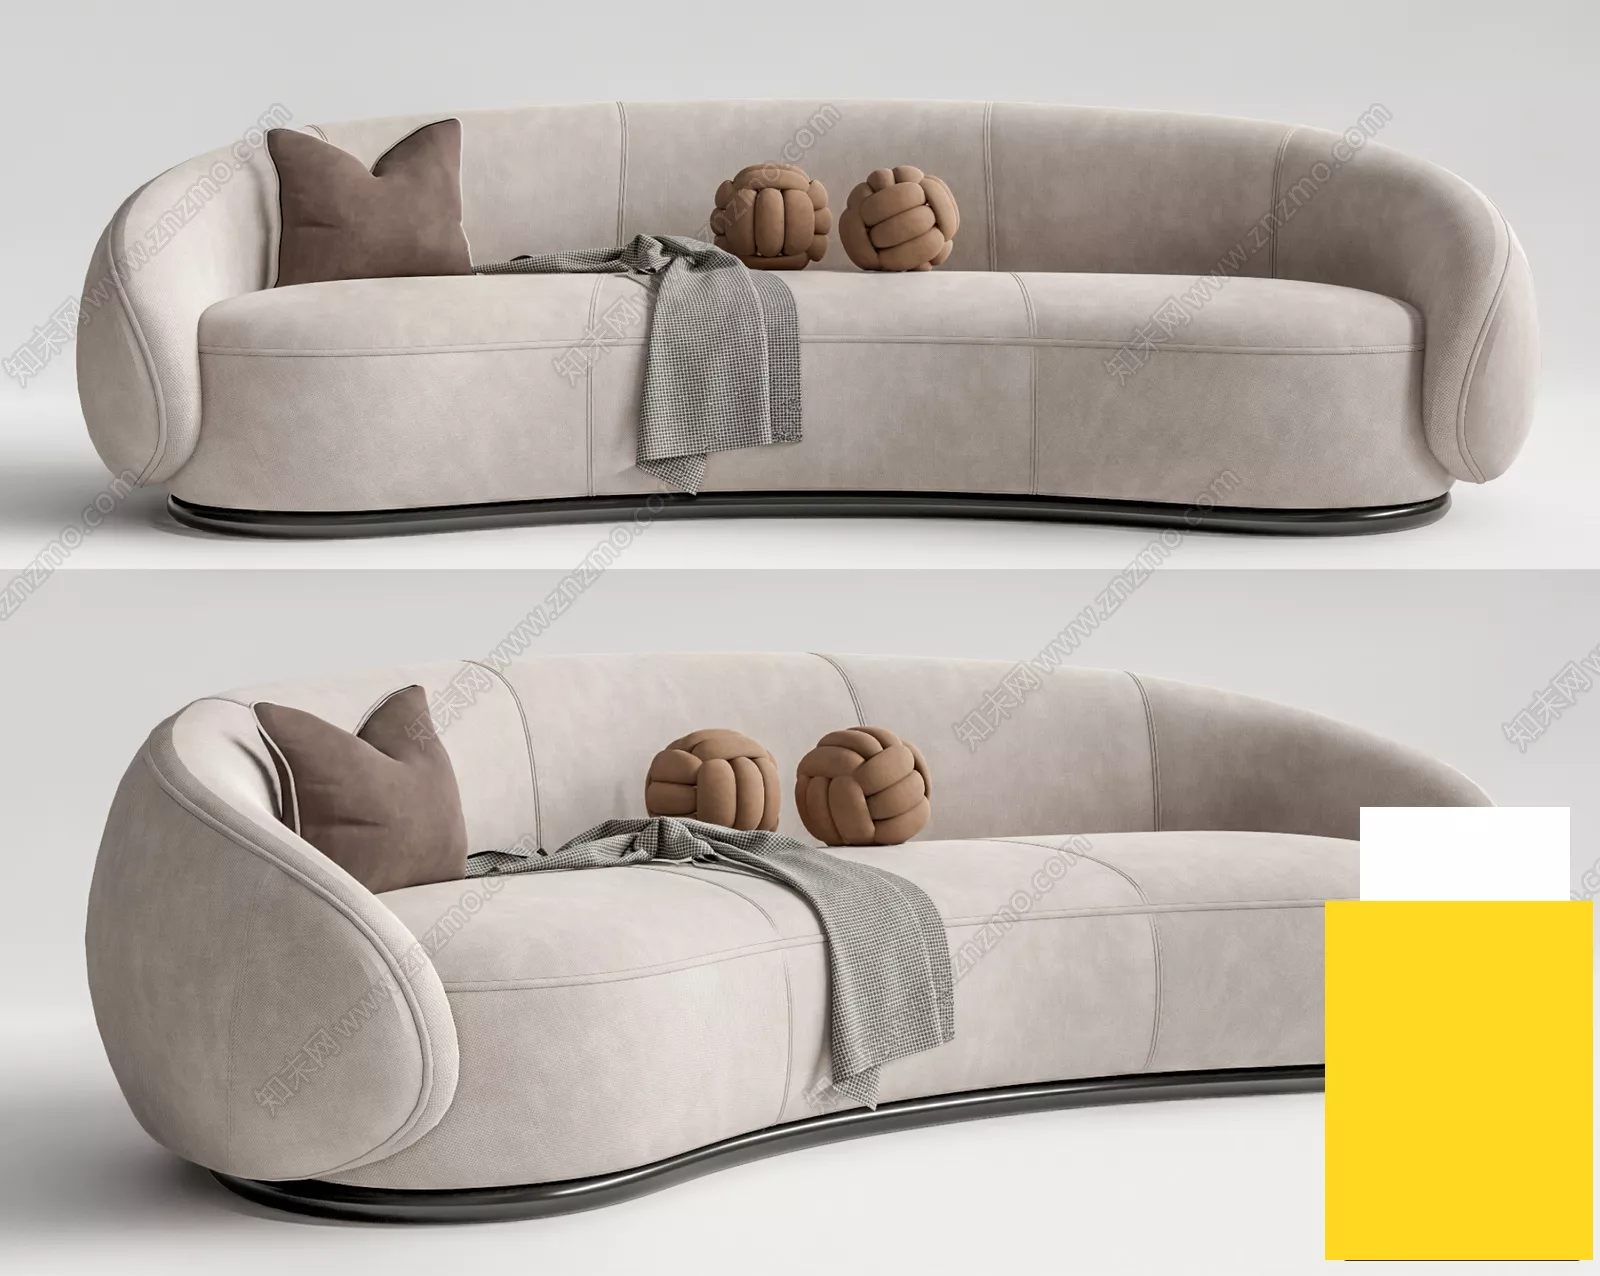 MODERN SOFA - SKETCHUP 3D MODEL - VRAY OR ENSCAPE - ID13160